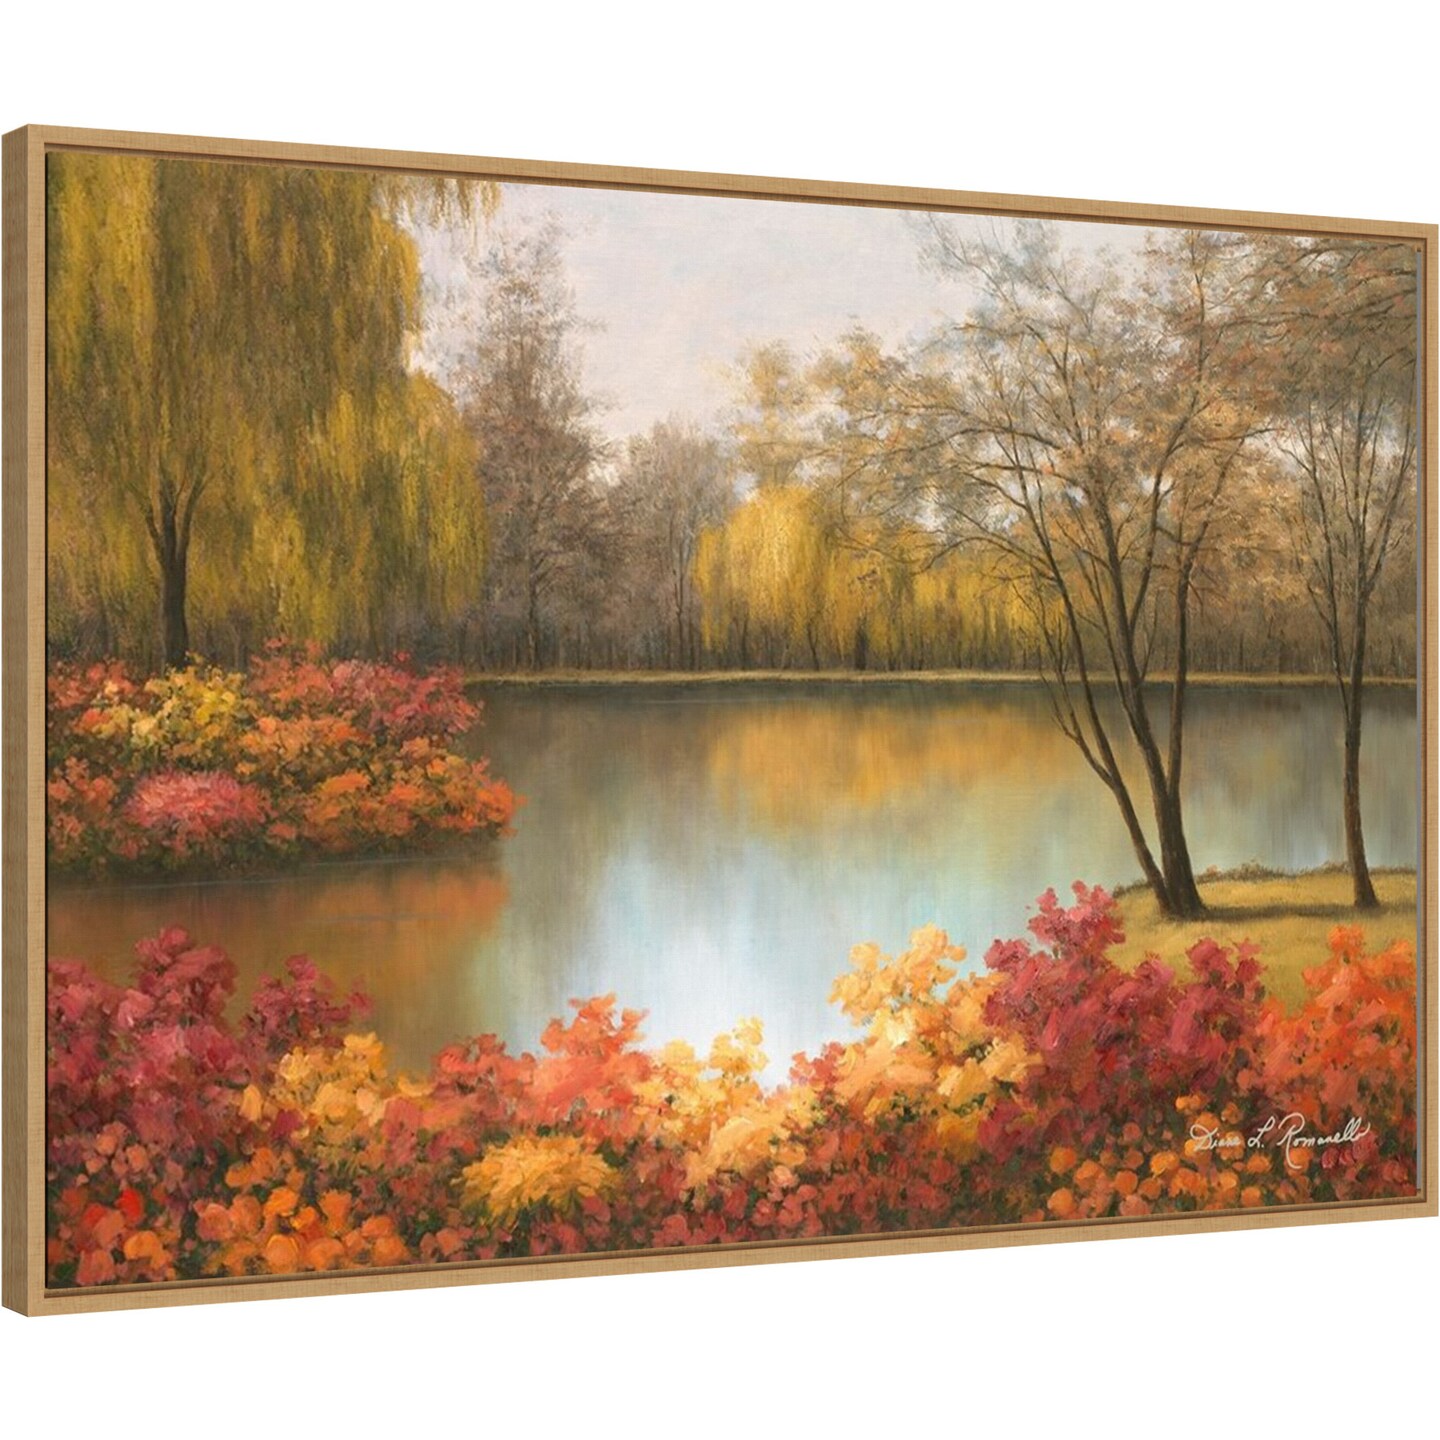 Autumn Palette by Diane Romanello 33-in. W x 23-in. H. Canvas Wall Art Print Framed in Natural